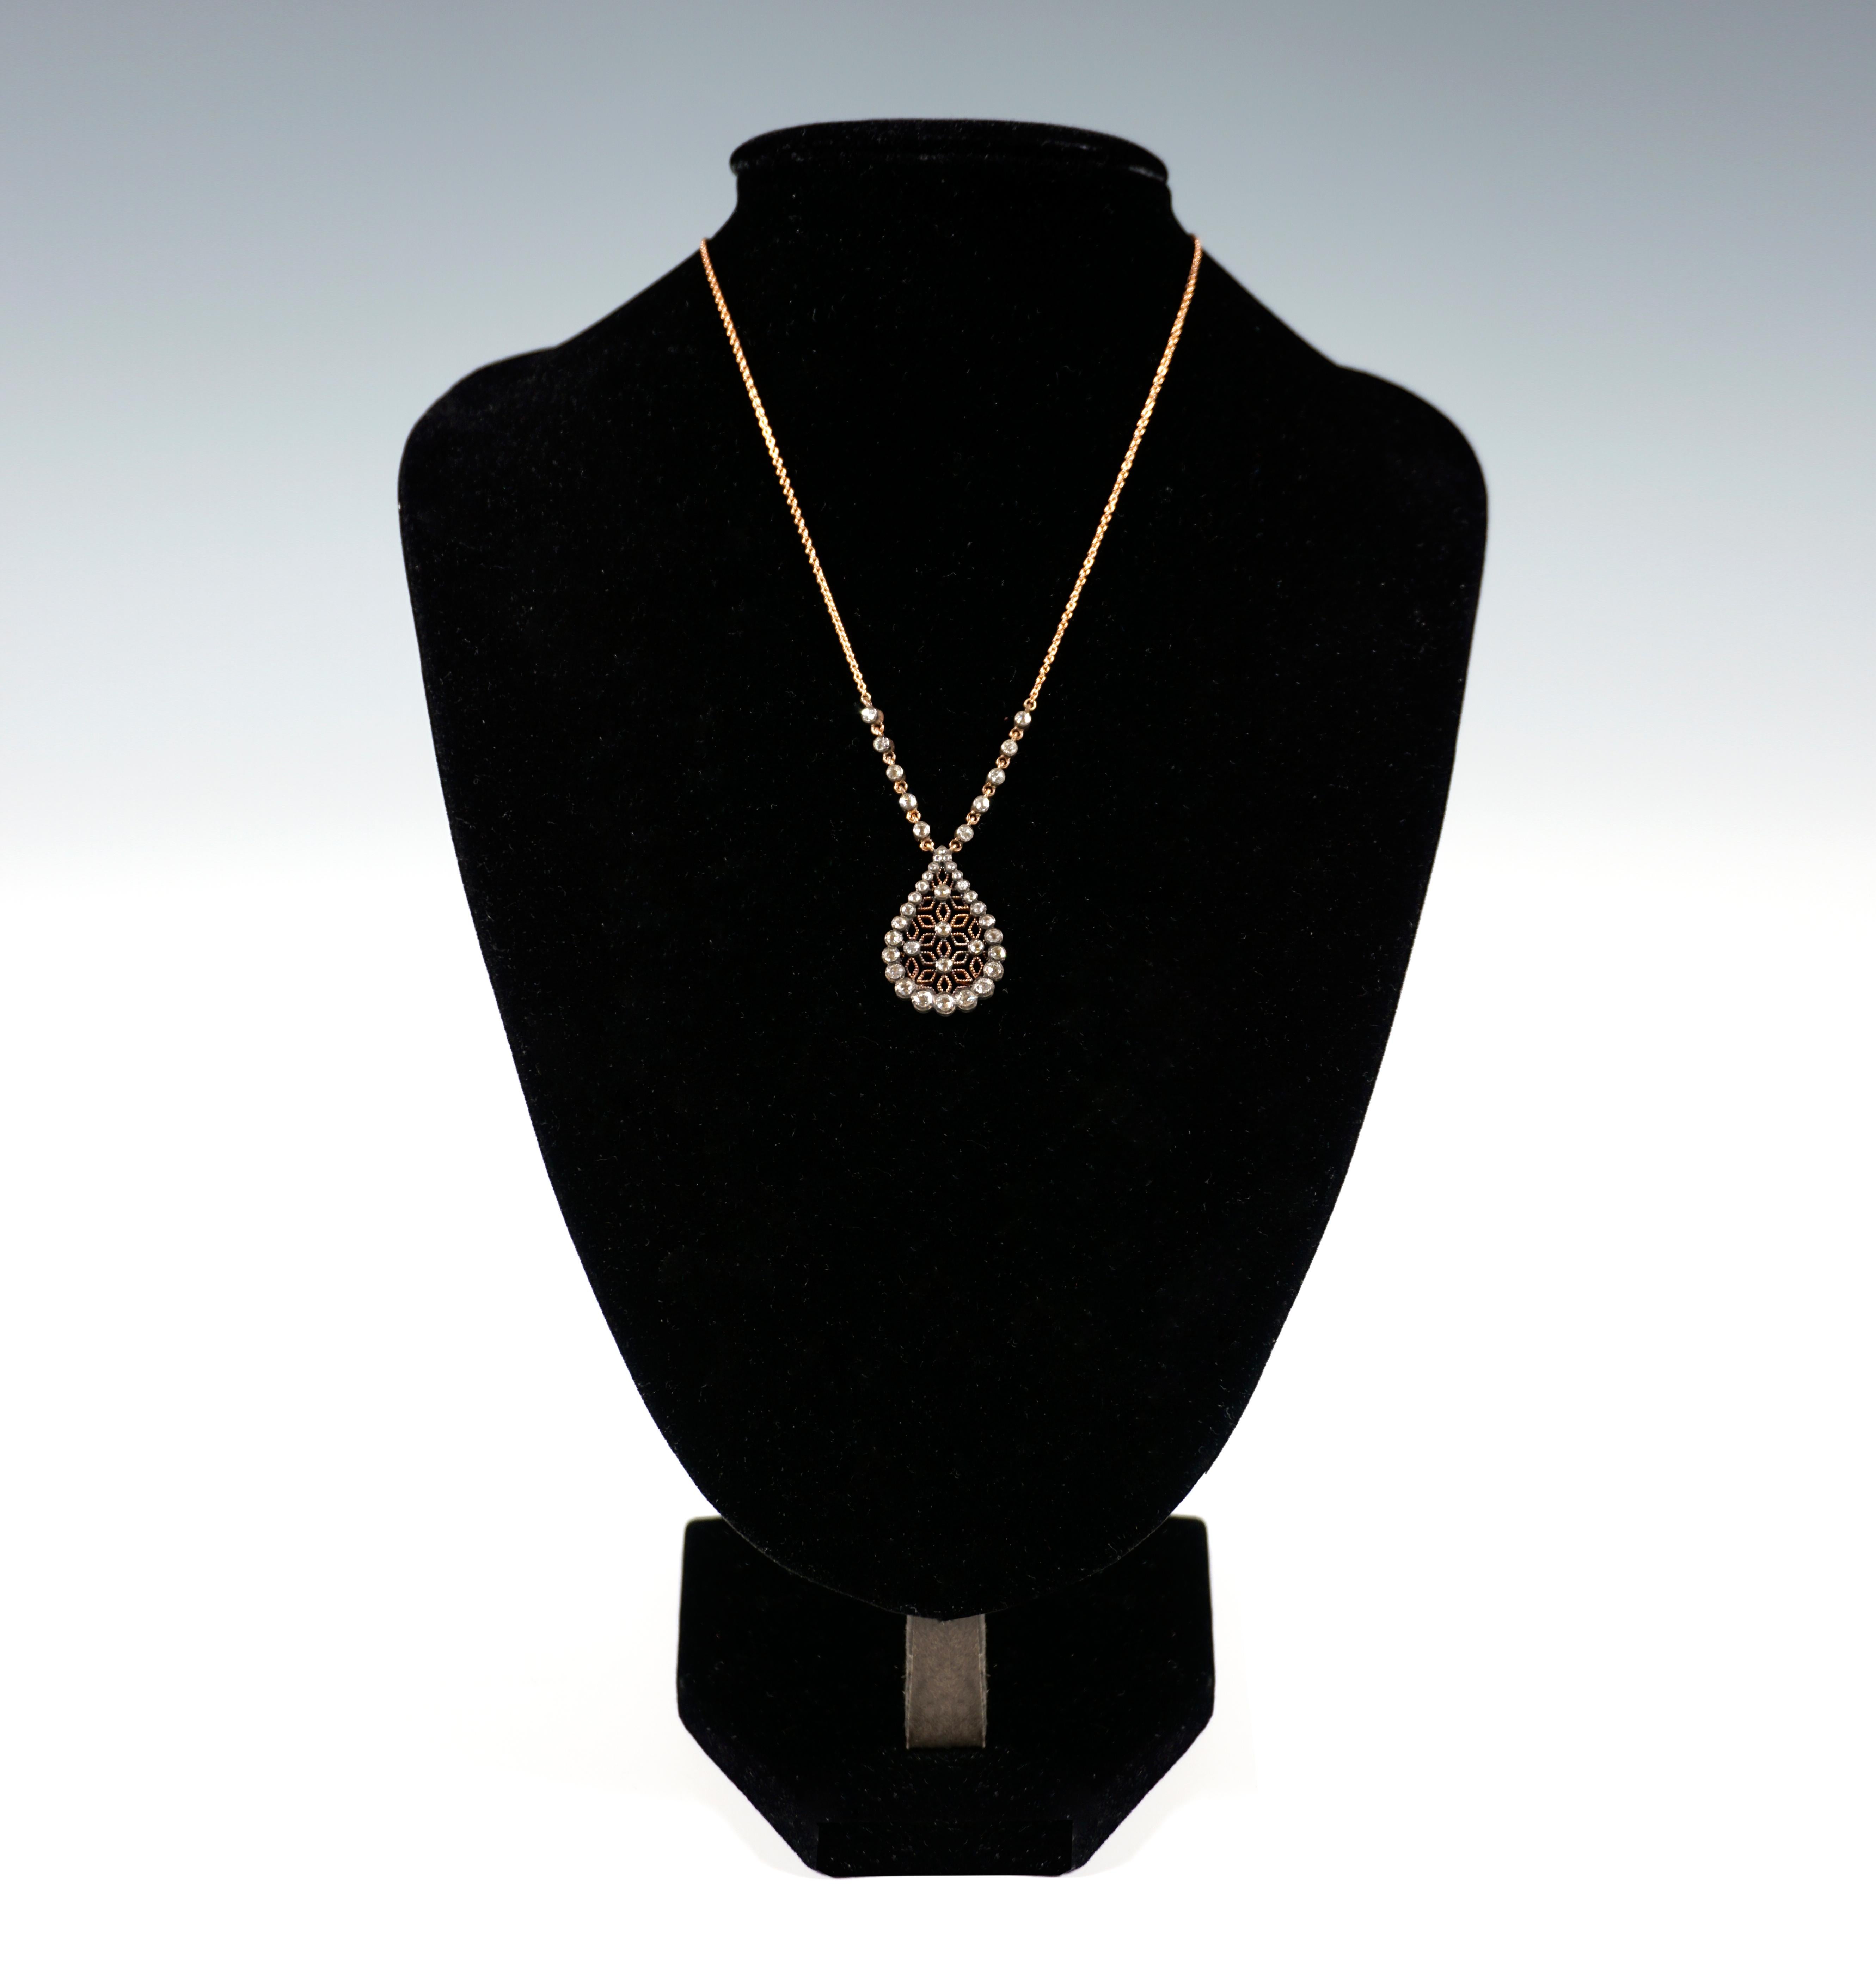 Delicate necklace with drop-shaped pendant, openwork with star-shaped branching, chased on the surface, attached rose-cut diamonds in various sizes frame the pendant, individual diamonds form centers in the cut-out stars, 5 diamonds at the base of